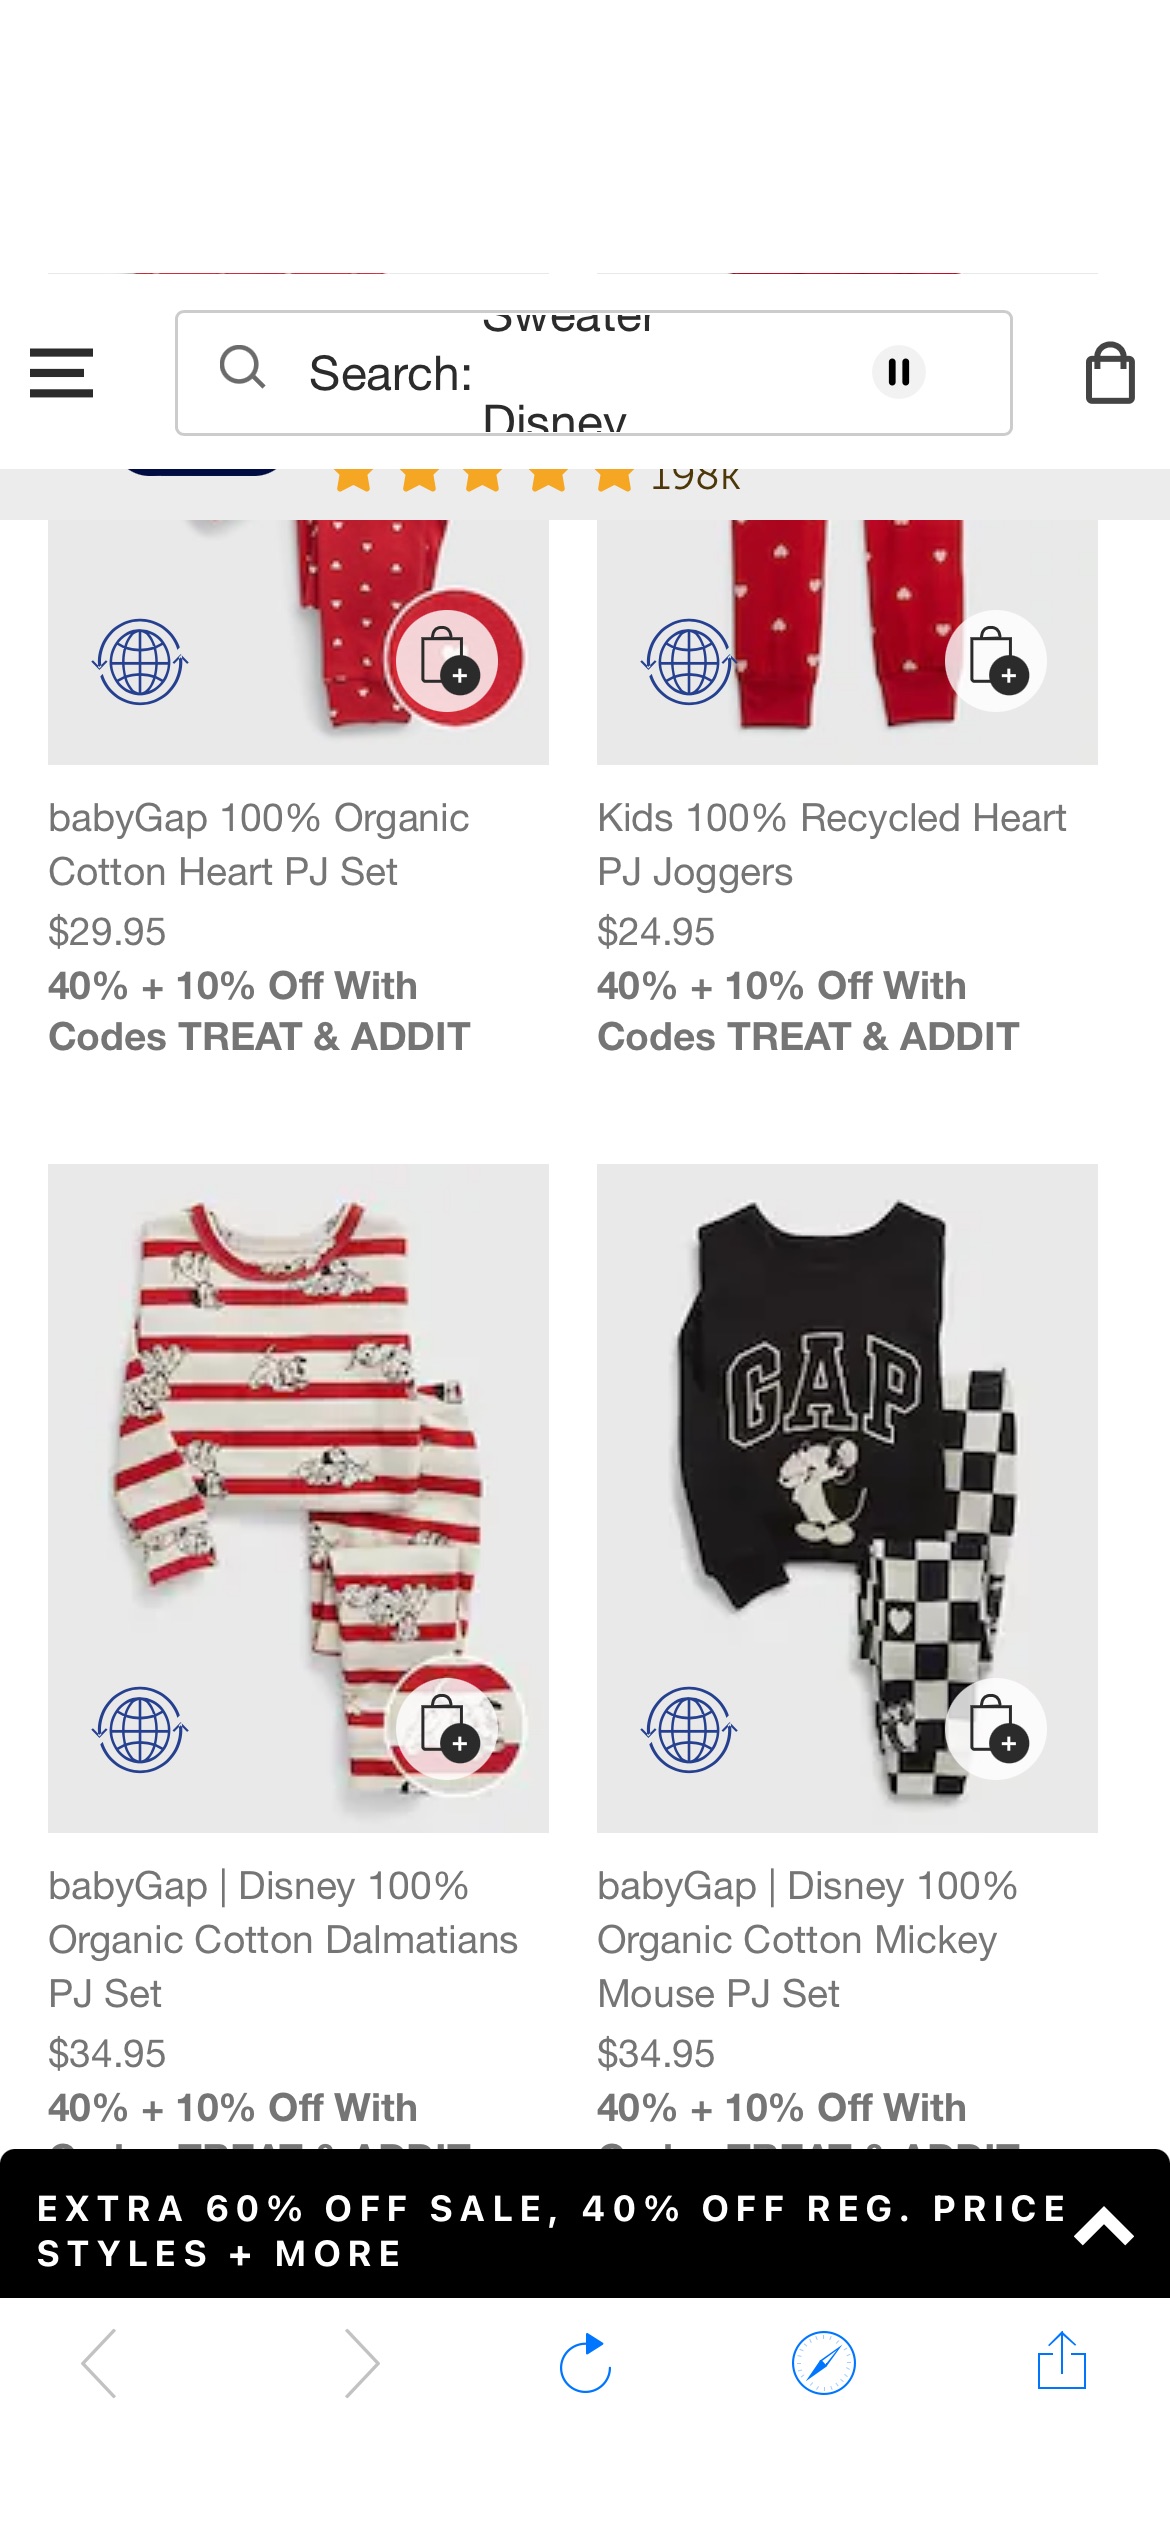 Spread the love this Valentine's Day with outfits for the kiddos. Shop shirts, comfy PJs, and more available in fun pink and red colors here at Gap here. Gap：舒适可爱的情人节风格，他们会爱上 L-O-V-E。 选购爱情系列